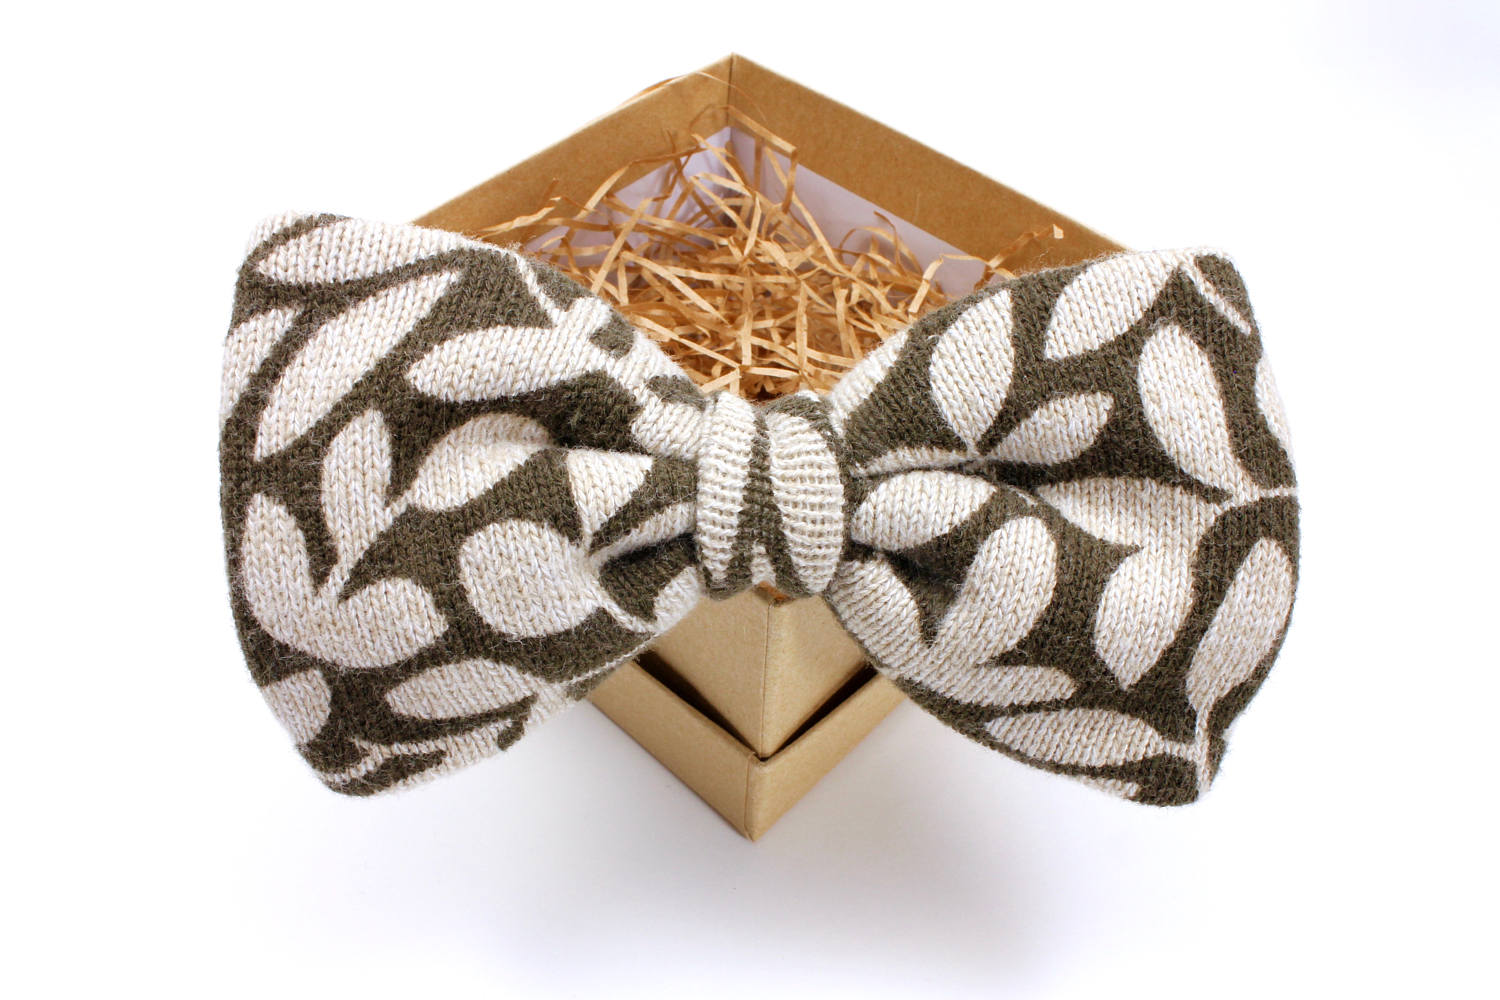 Olive and Tan Leaf Print Sweater Bow Tie